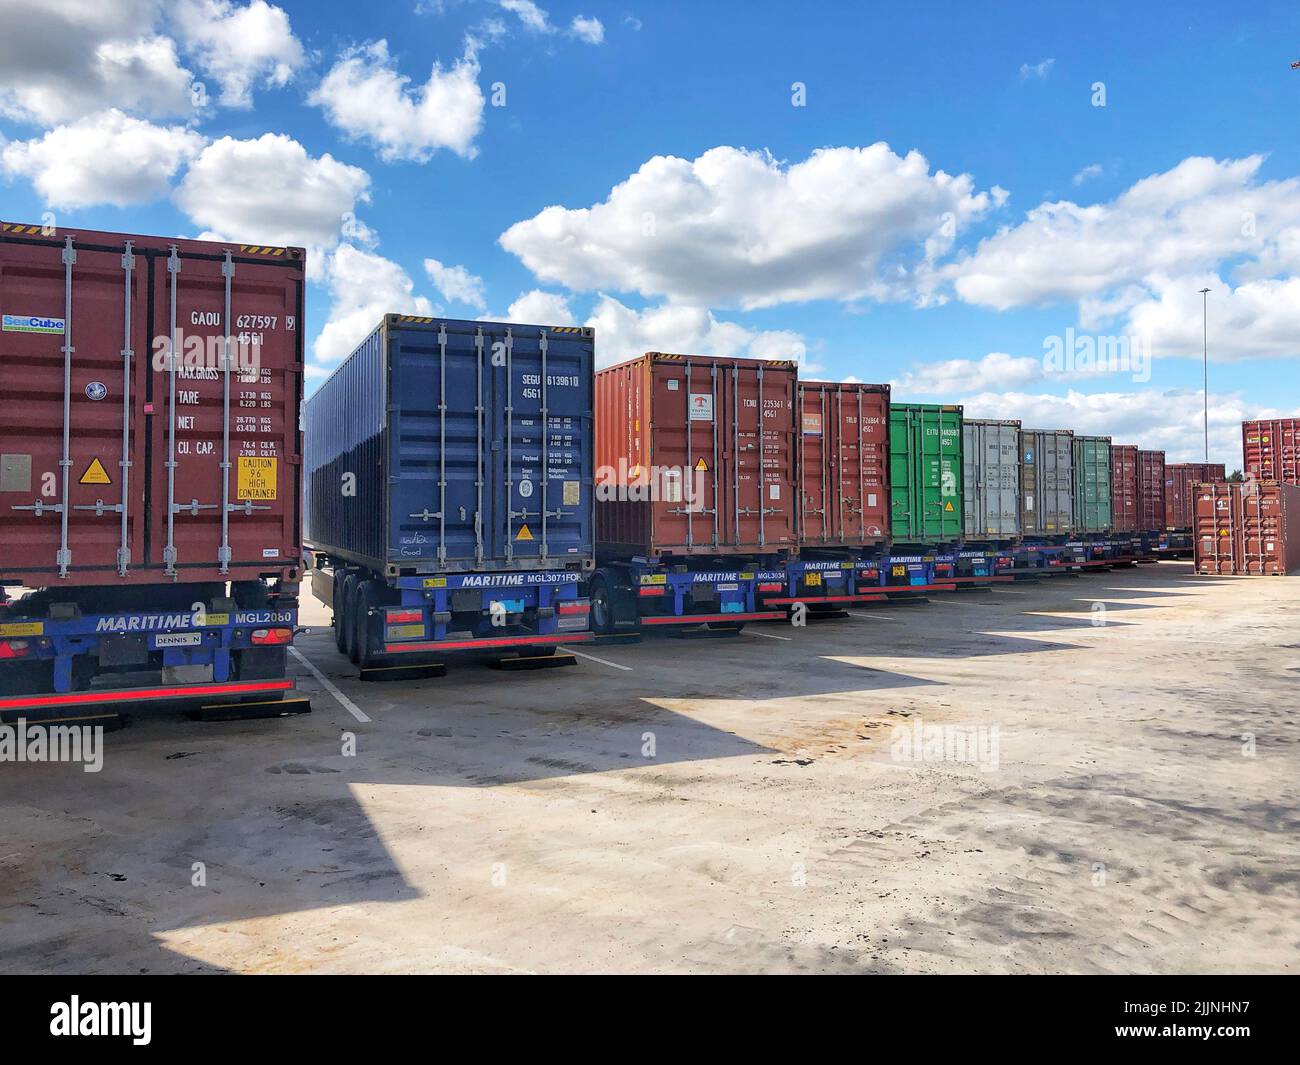 A row of shipping containers loaded onto road transport trucks for onward movement to terminals and docks Stock Photo